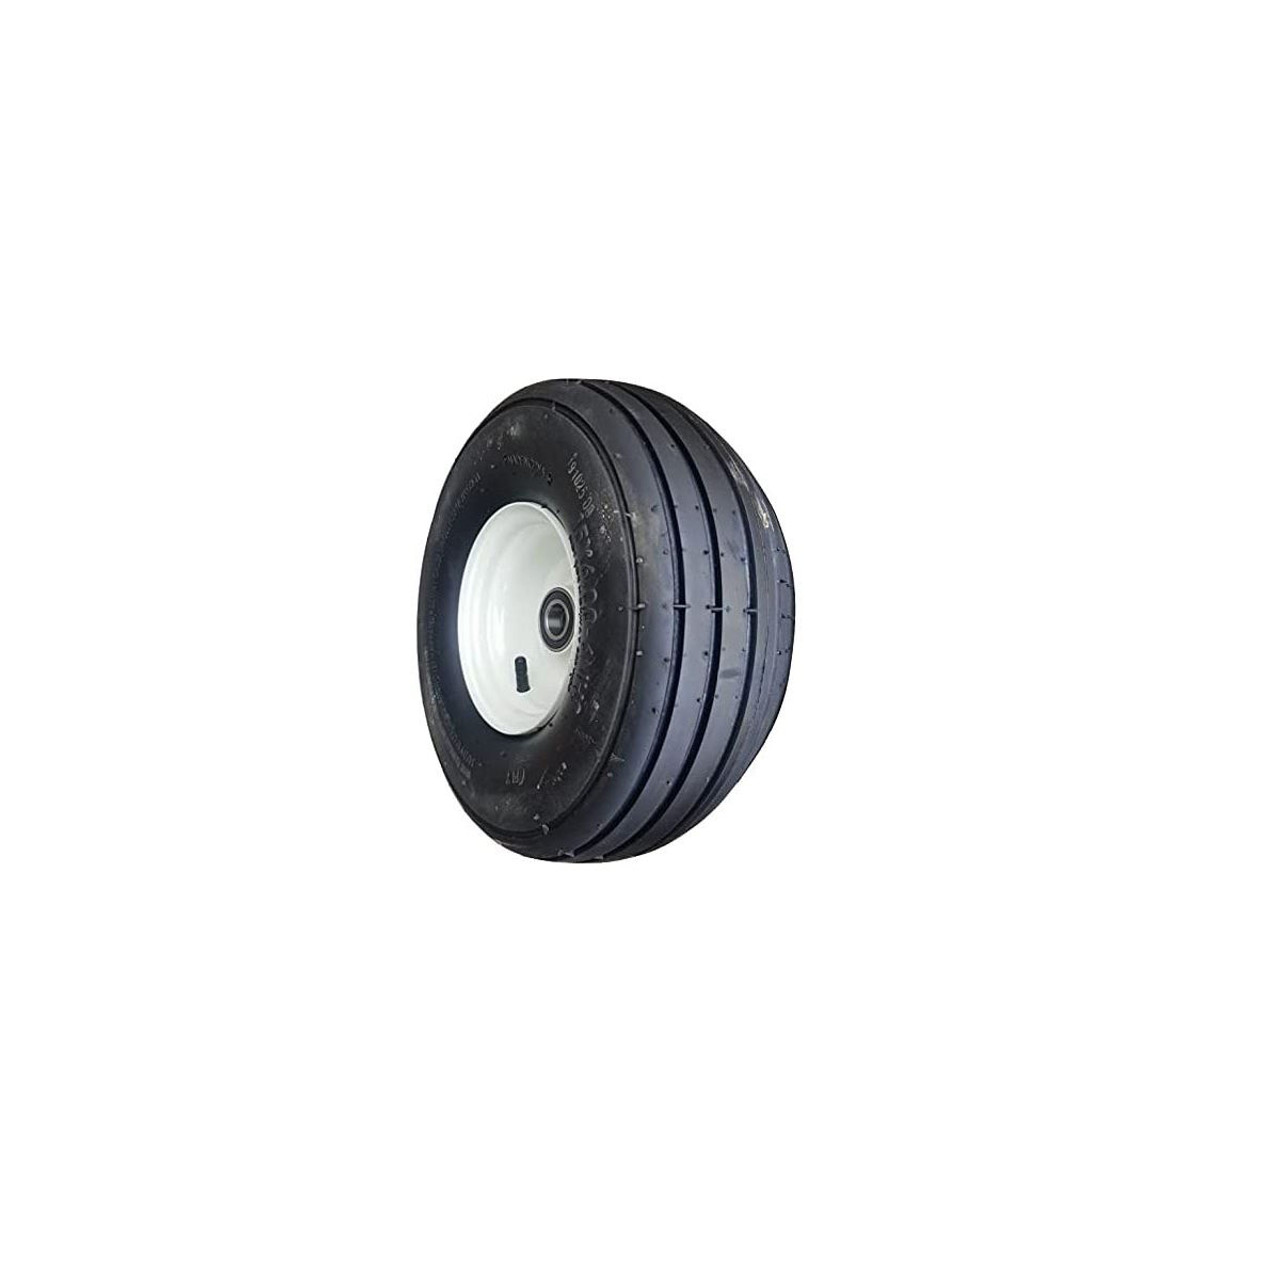 Tedder Tire and Wheel with 2" Hub Length (Offset) for 1" Axle (15x6.00-6) 6ply